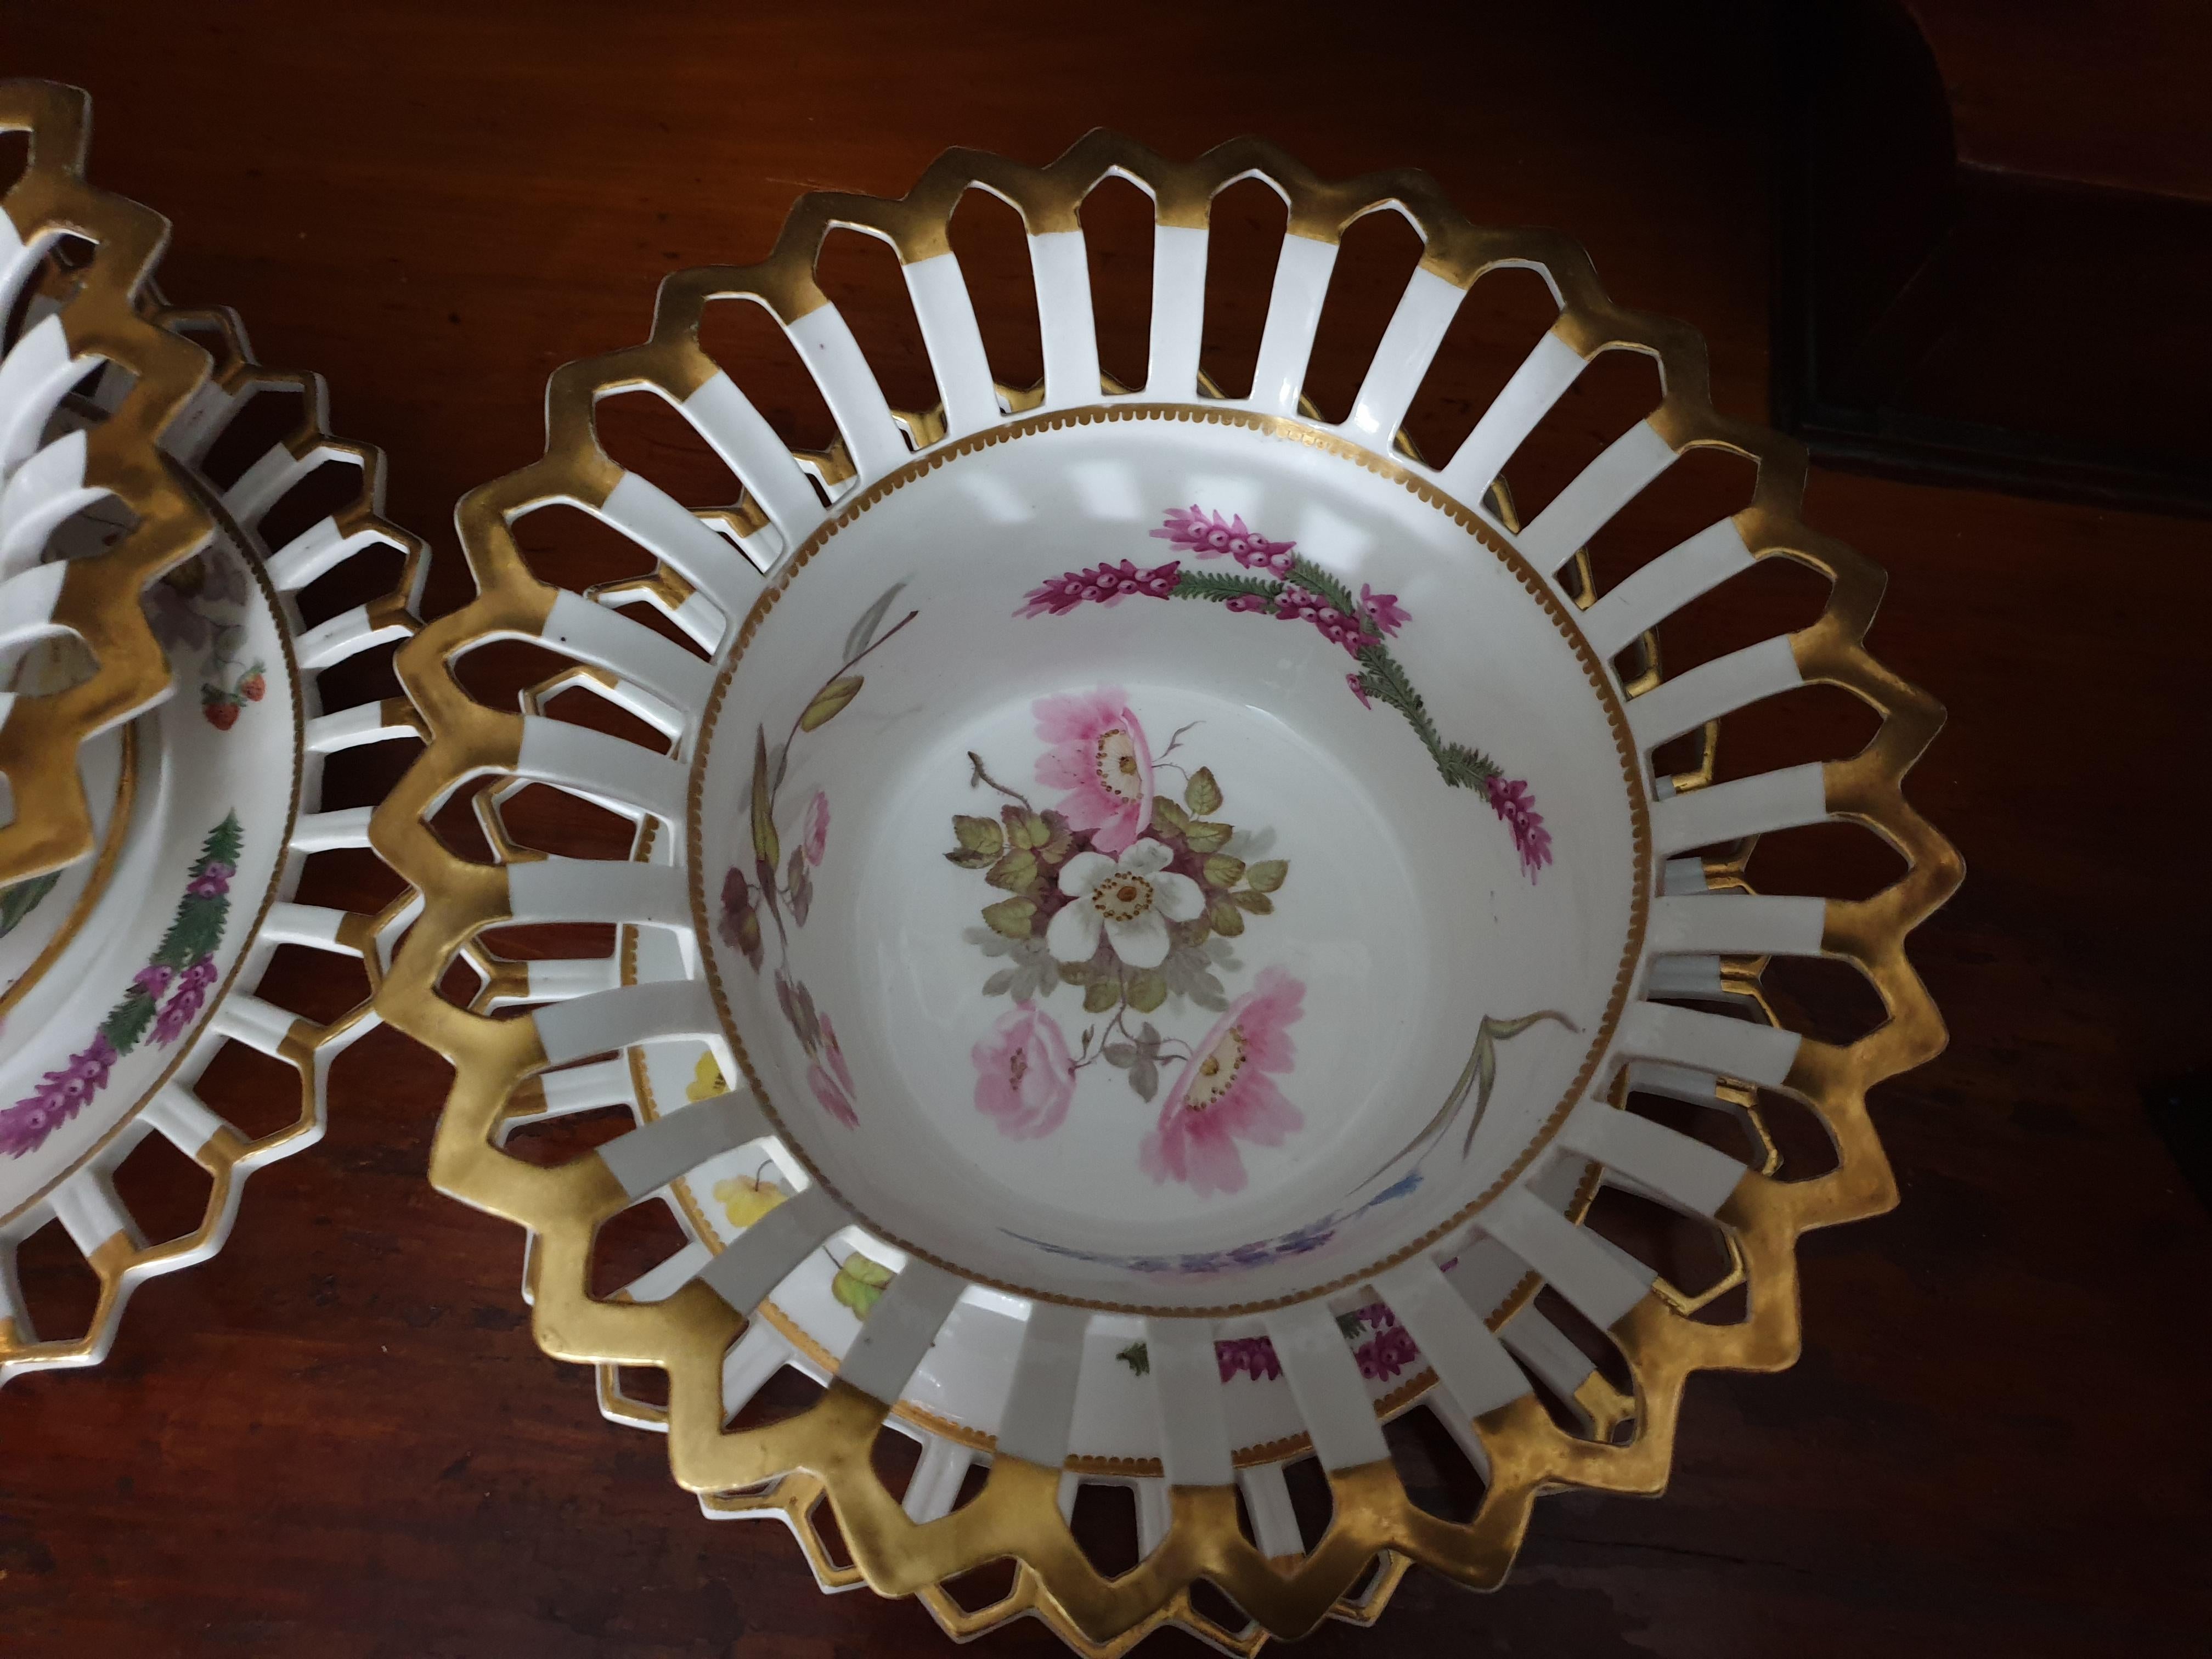 Porcelain H & R Daniel Ice Pail Reticulated Fruit Bowls or Stands By William Pollard For Sale